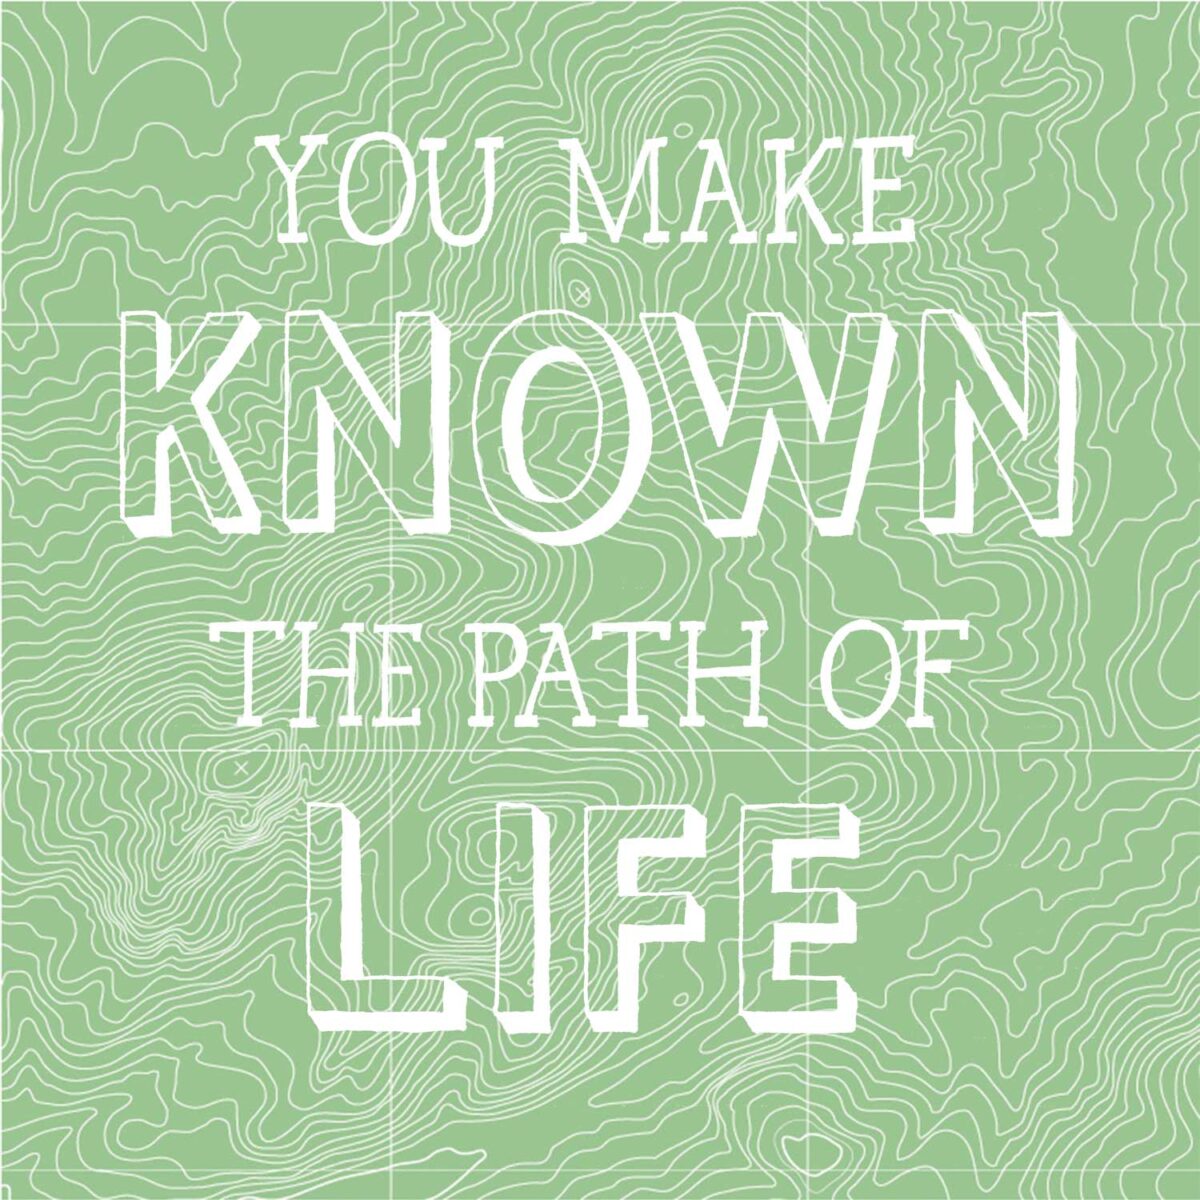 Hand lettering that reads "You make know the path of life" on a topographic map.